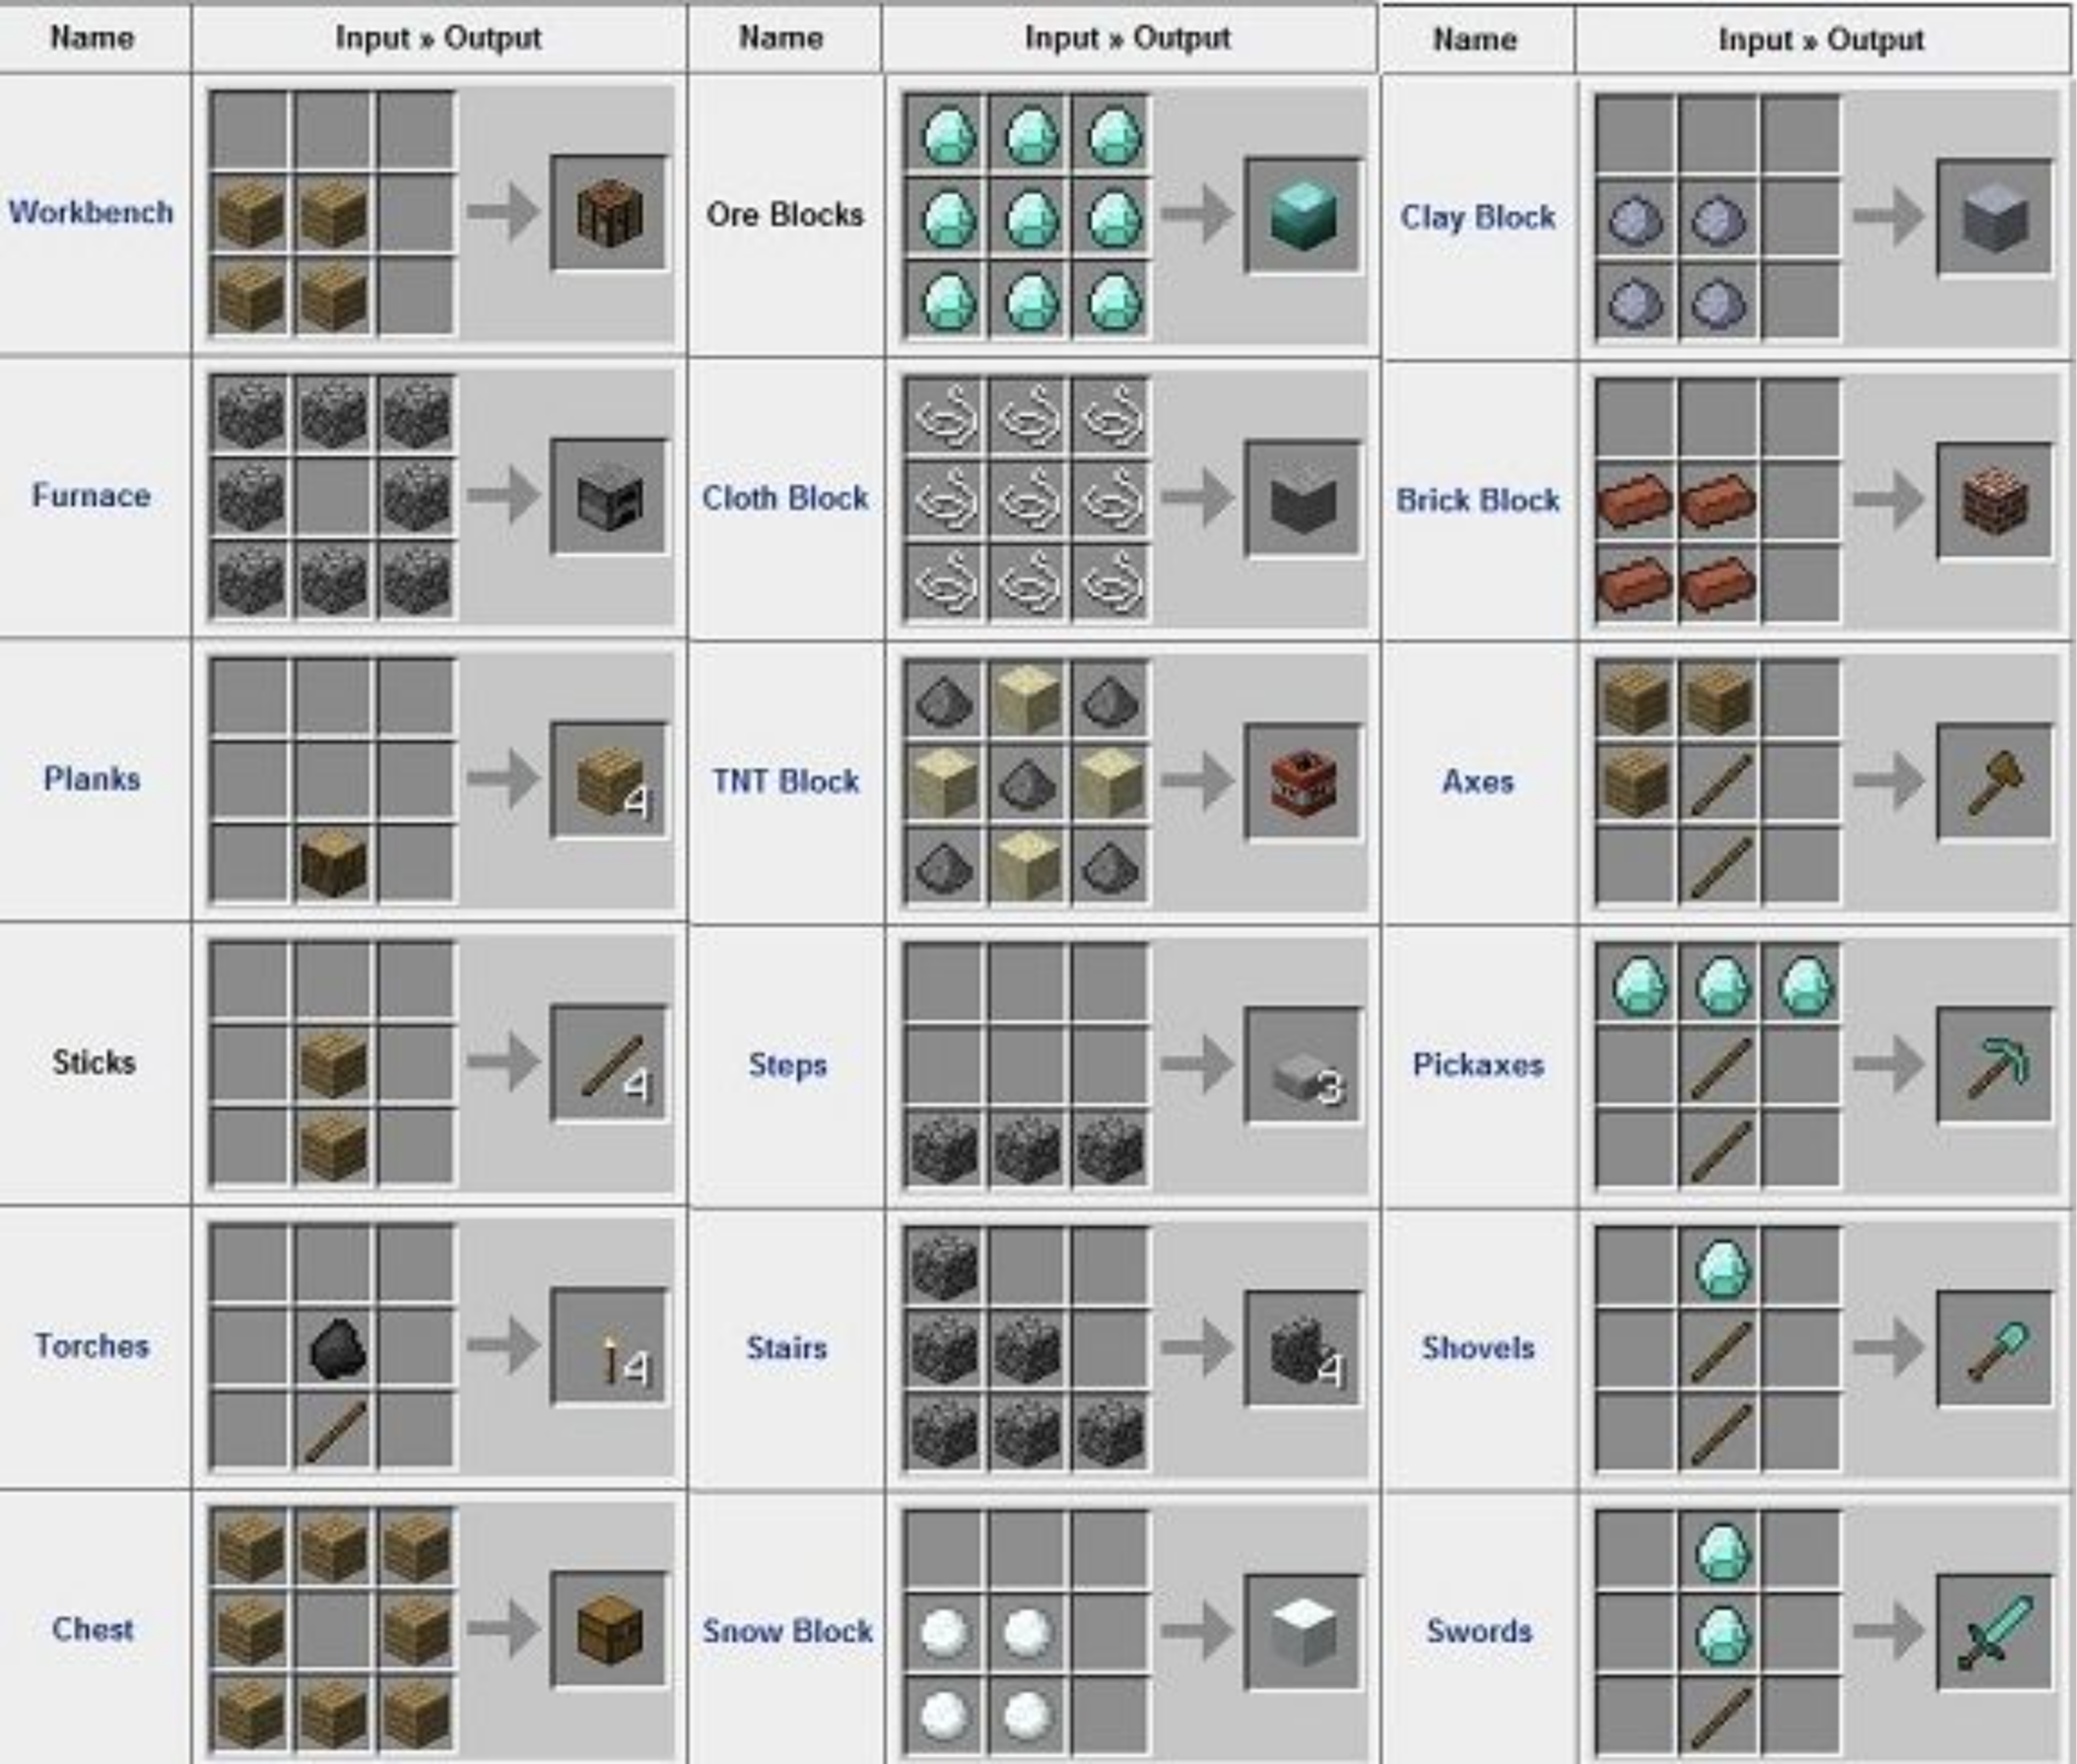 Pictured above is a detailed look at some recipes in Minecraft’s crafting system.  